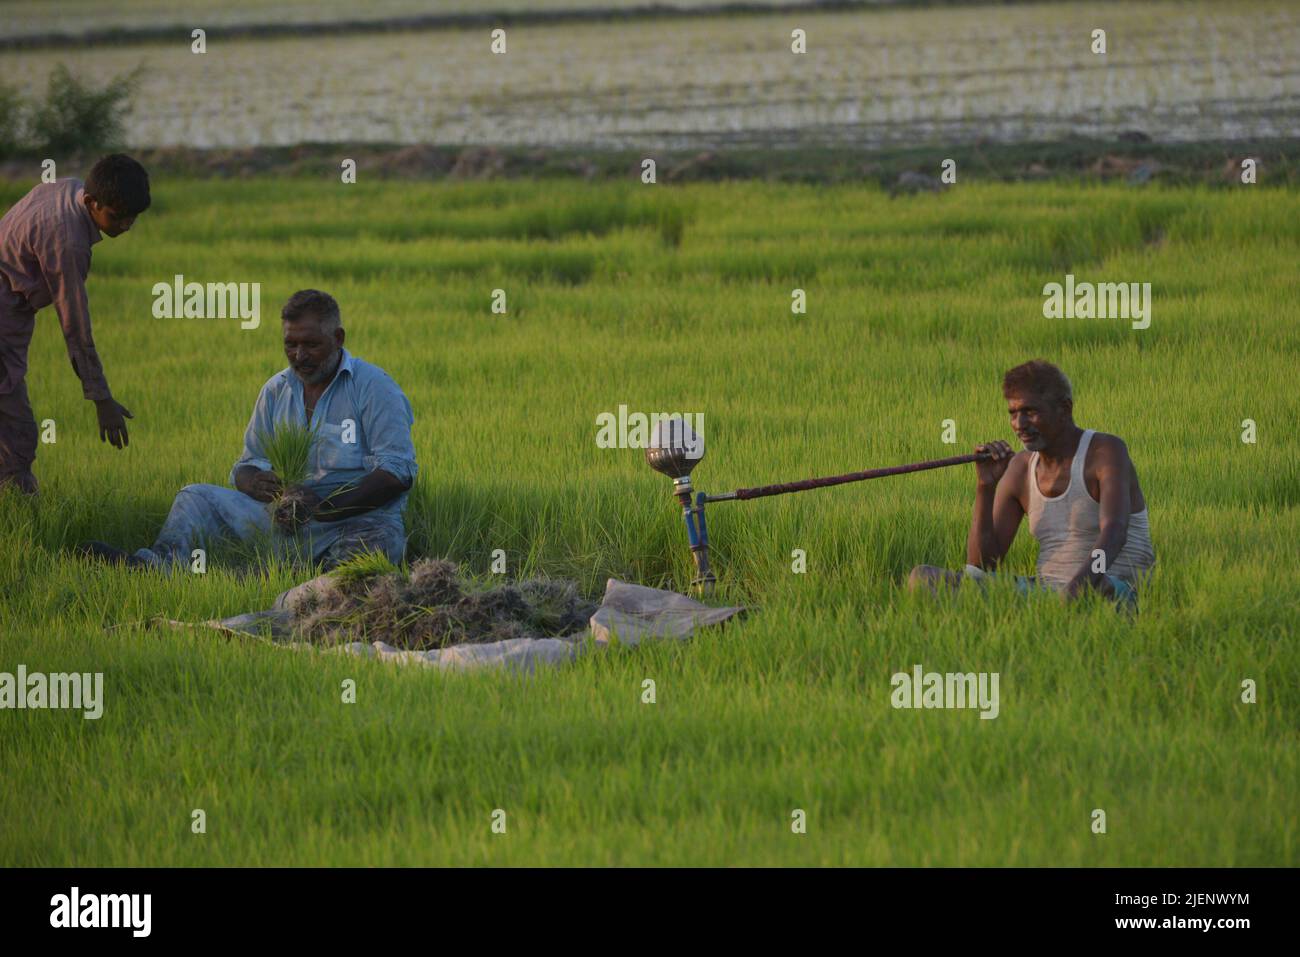 June 26, 2022, Lahore, Punjab, Pakistan: Pakistani villagers are busy in sapling the paddy nursery of rice plants from a field for re-plantation in a traditional way in sub-area of Lahore. A paddy field is a flooded parcel of arable land used for growing semiaquatic rice. Paddy cultivation should not be confused with cultivation of deep water rice, which is grown in flooded conditions with water more than 50 cm (20 in) deep for at least a month. Genetic evidence published in the Proceedings of the National Academy of Sciences of the United States of America (PNAS) shows that all forms of paddy Stock Photo